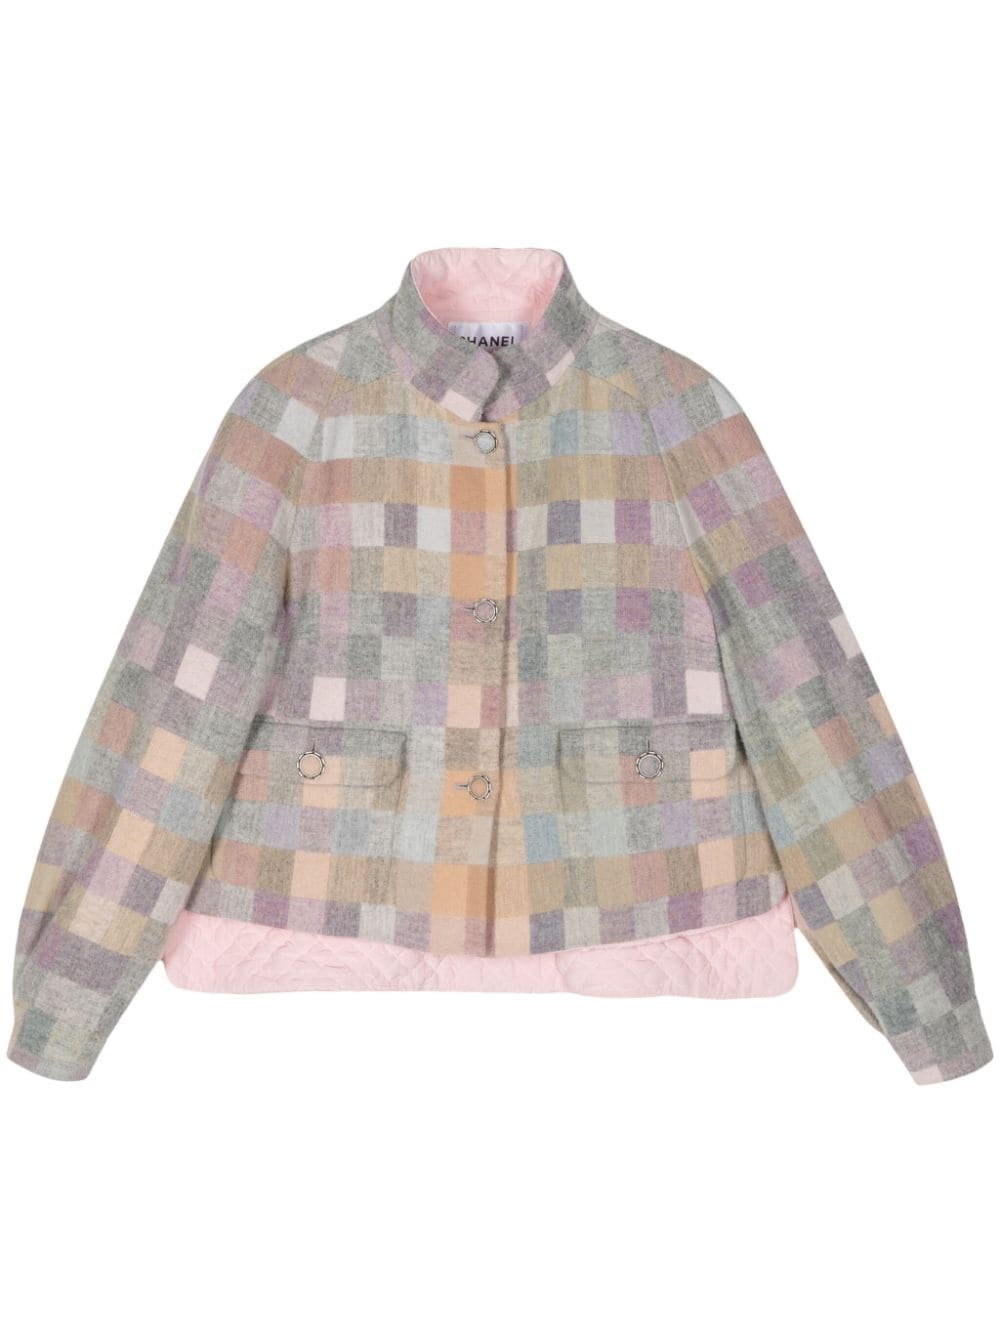 2000 checked wool jacket